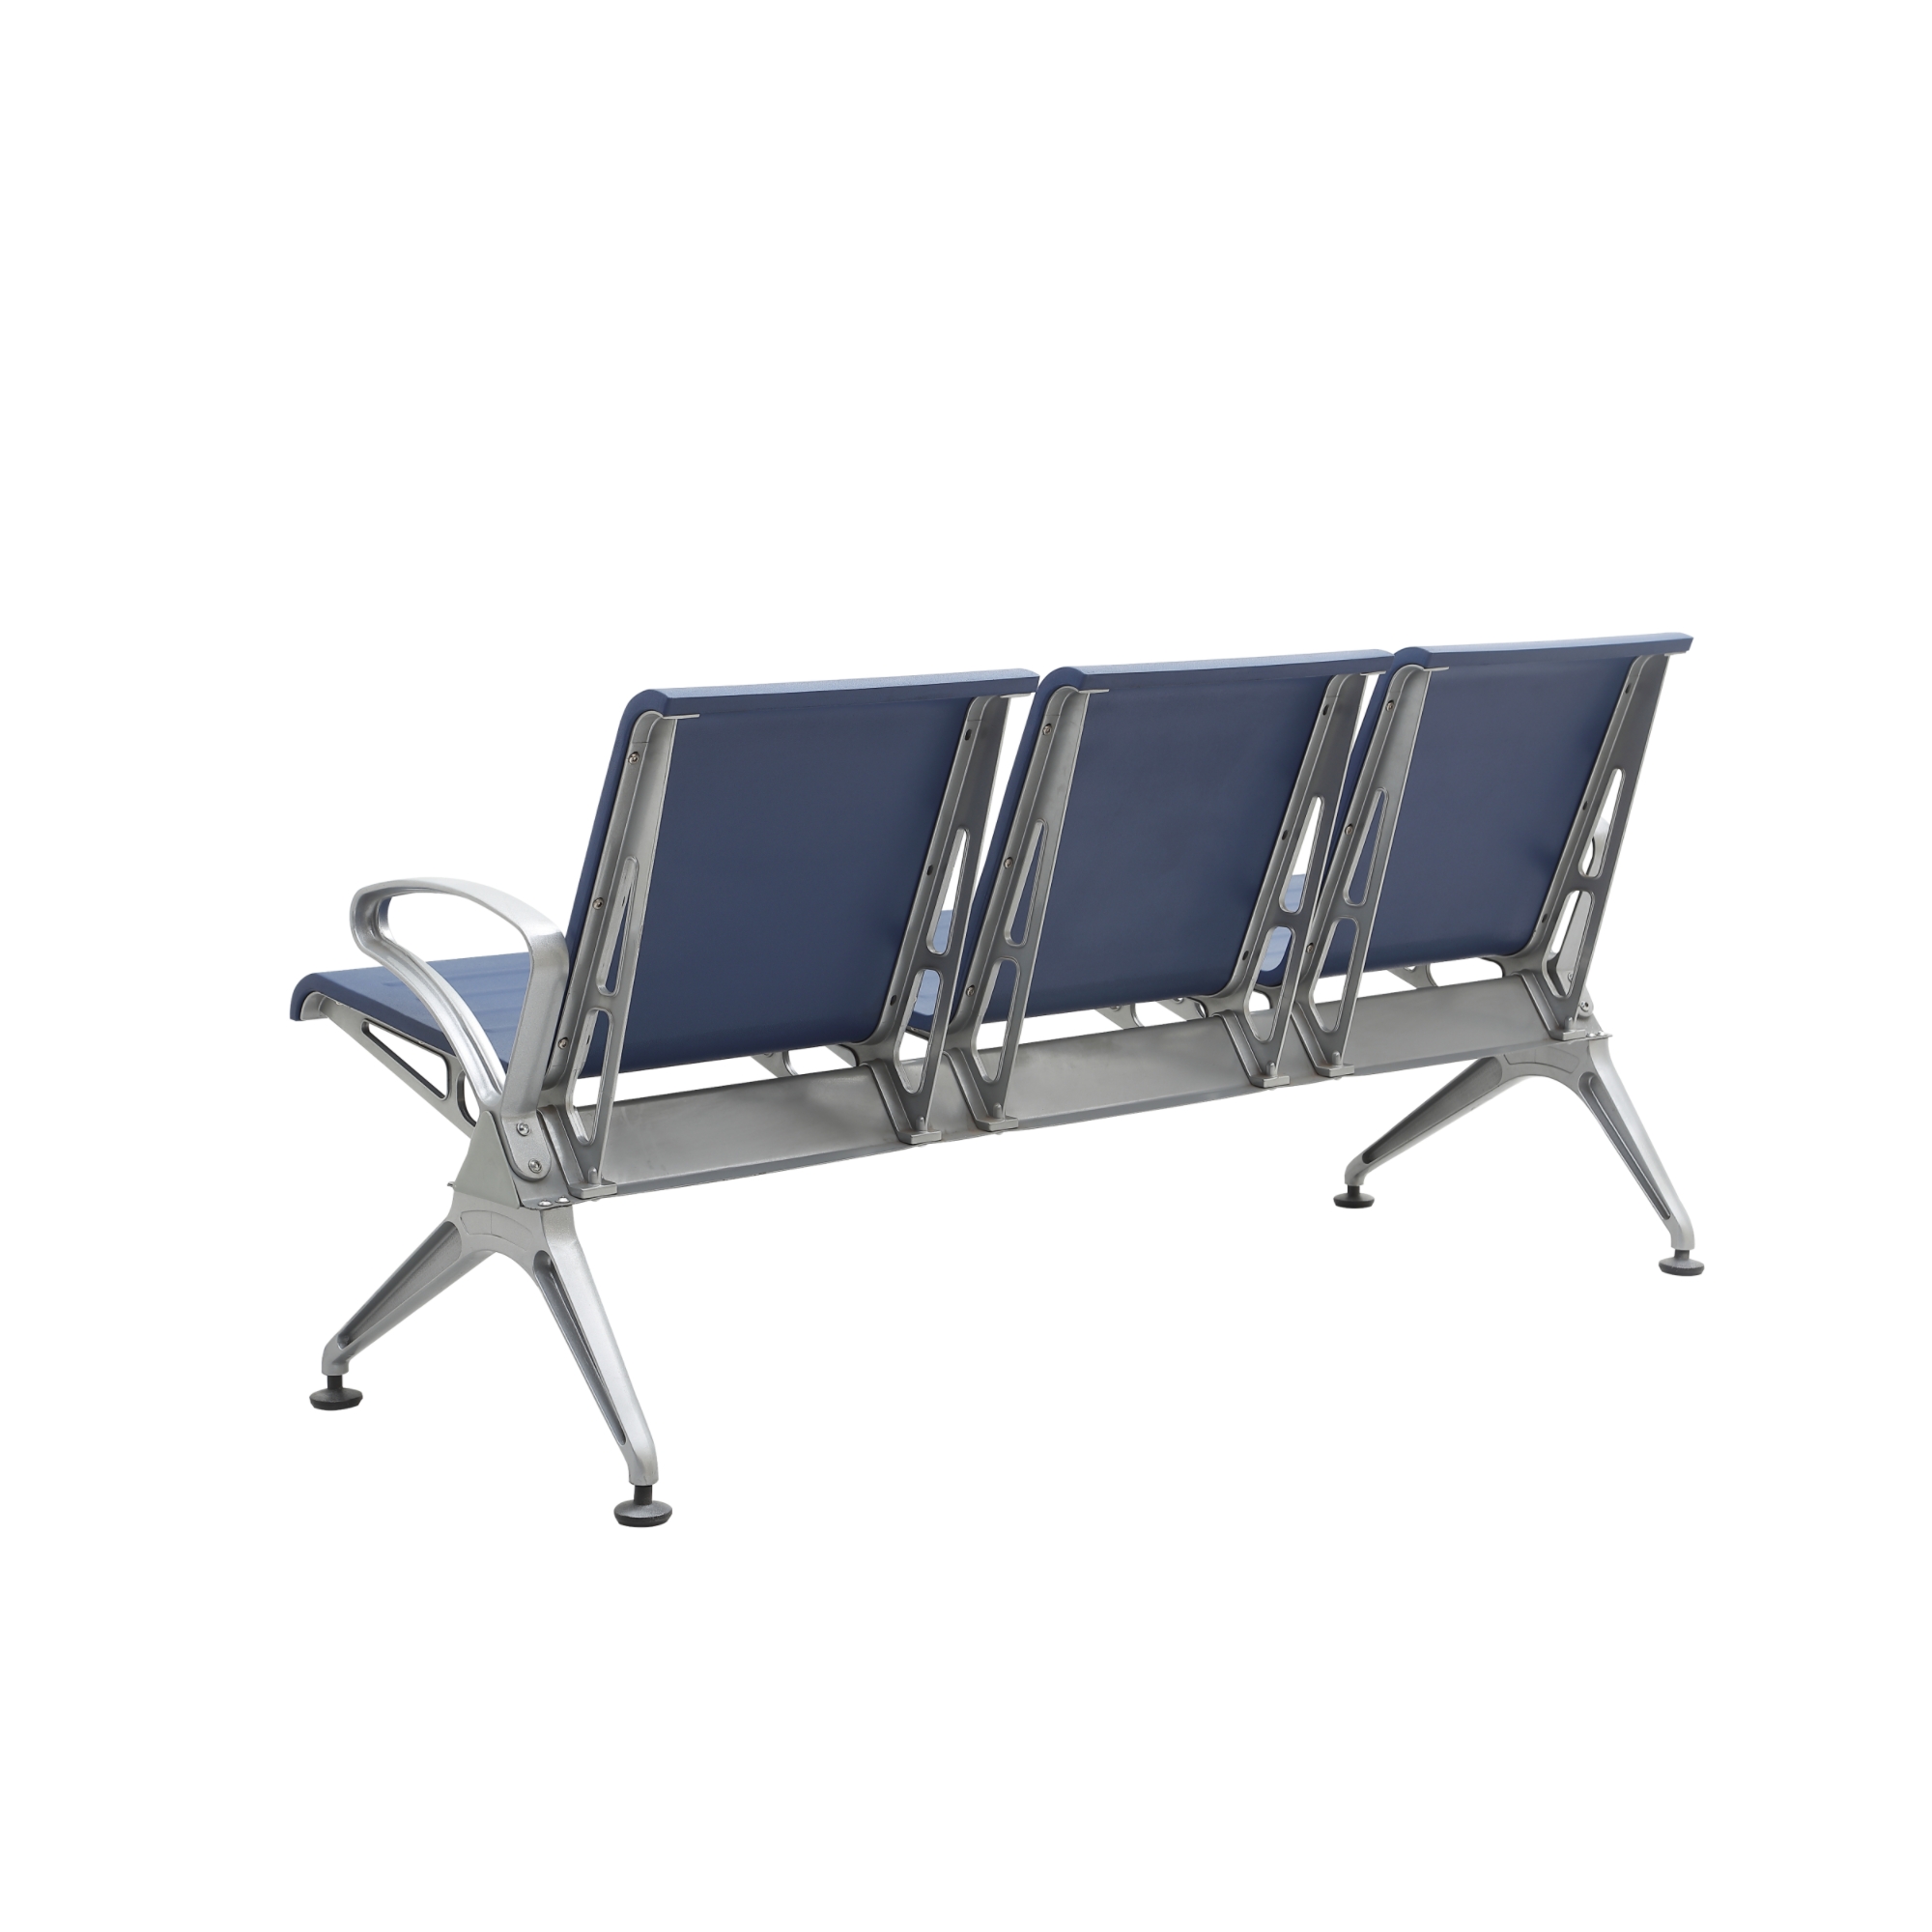 Public Waiting Chair Used For Airport Aluminum Steel PU Injection Foam Seating Chair Waiting Benches